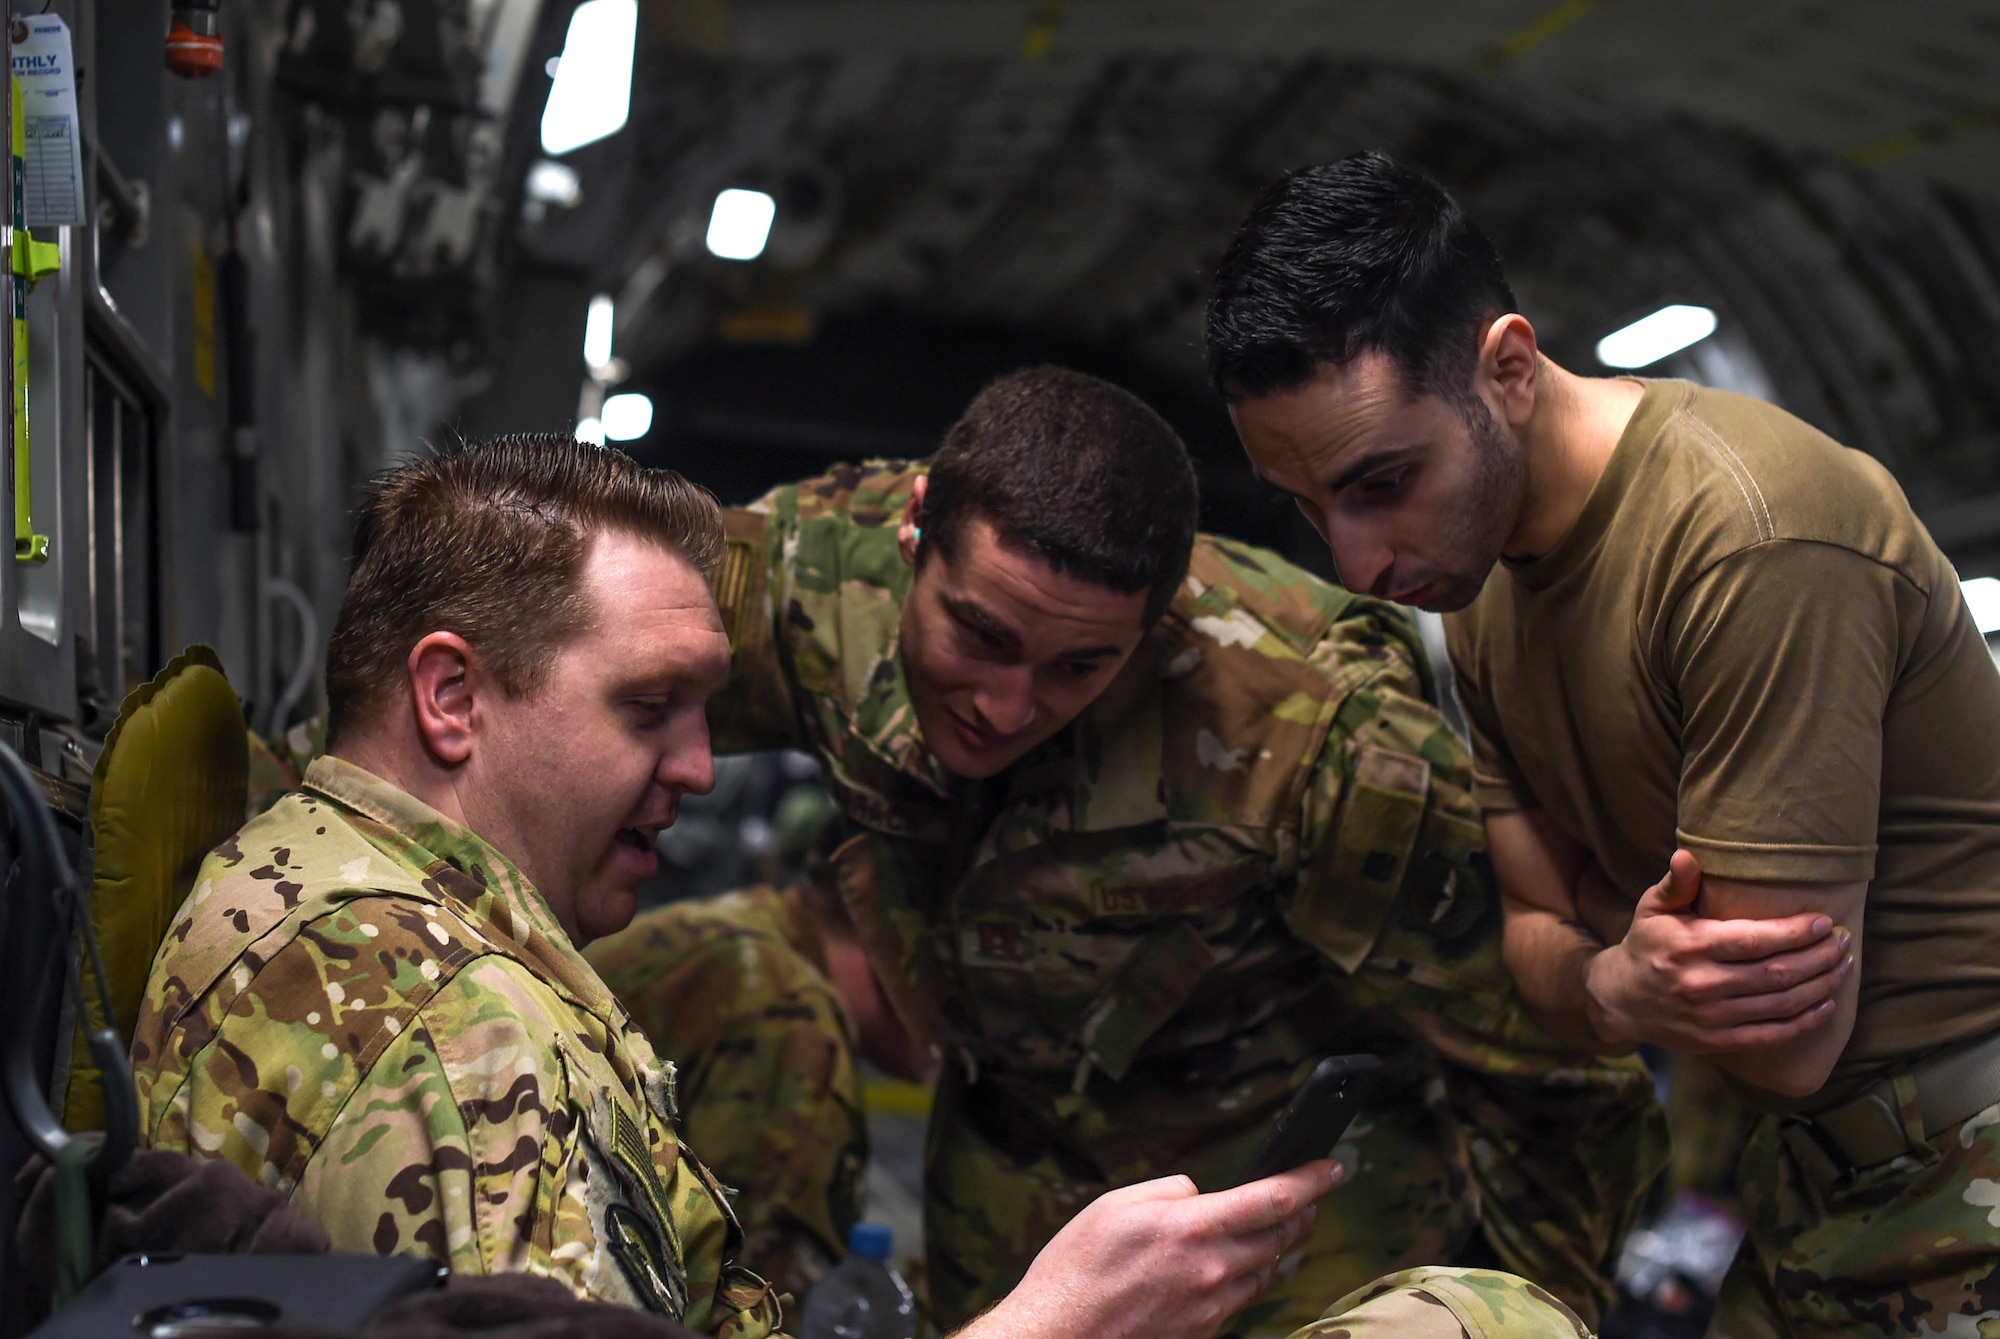 Staff Sgt. John Nieves Camacho, right, 627th Air Base Group religious affairs specialist, talks with Staff Sgt. Cameron Morris, left, 4th Airlift Squadron loadmaster, and Capt. Alexander Jobrack, middle, 62nd Medical Squadron flight surgeon, inside a C-17 Globemaster III at Rota Naval Station, Spain, Nov. 28, 2018. Camacho was part of a religious support team that flew with deploying and returning Airmen to offer any assistance they may need during the flights to and from Ali Al Salem Air Base, Kuwait, and Al Udeid Air Base, Qatar. (U.S. Air Force photo by Senior Airman Tryphena Mayhugh)